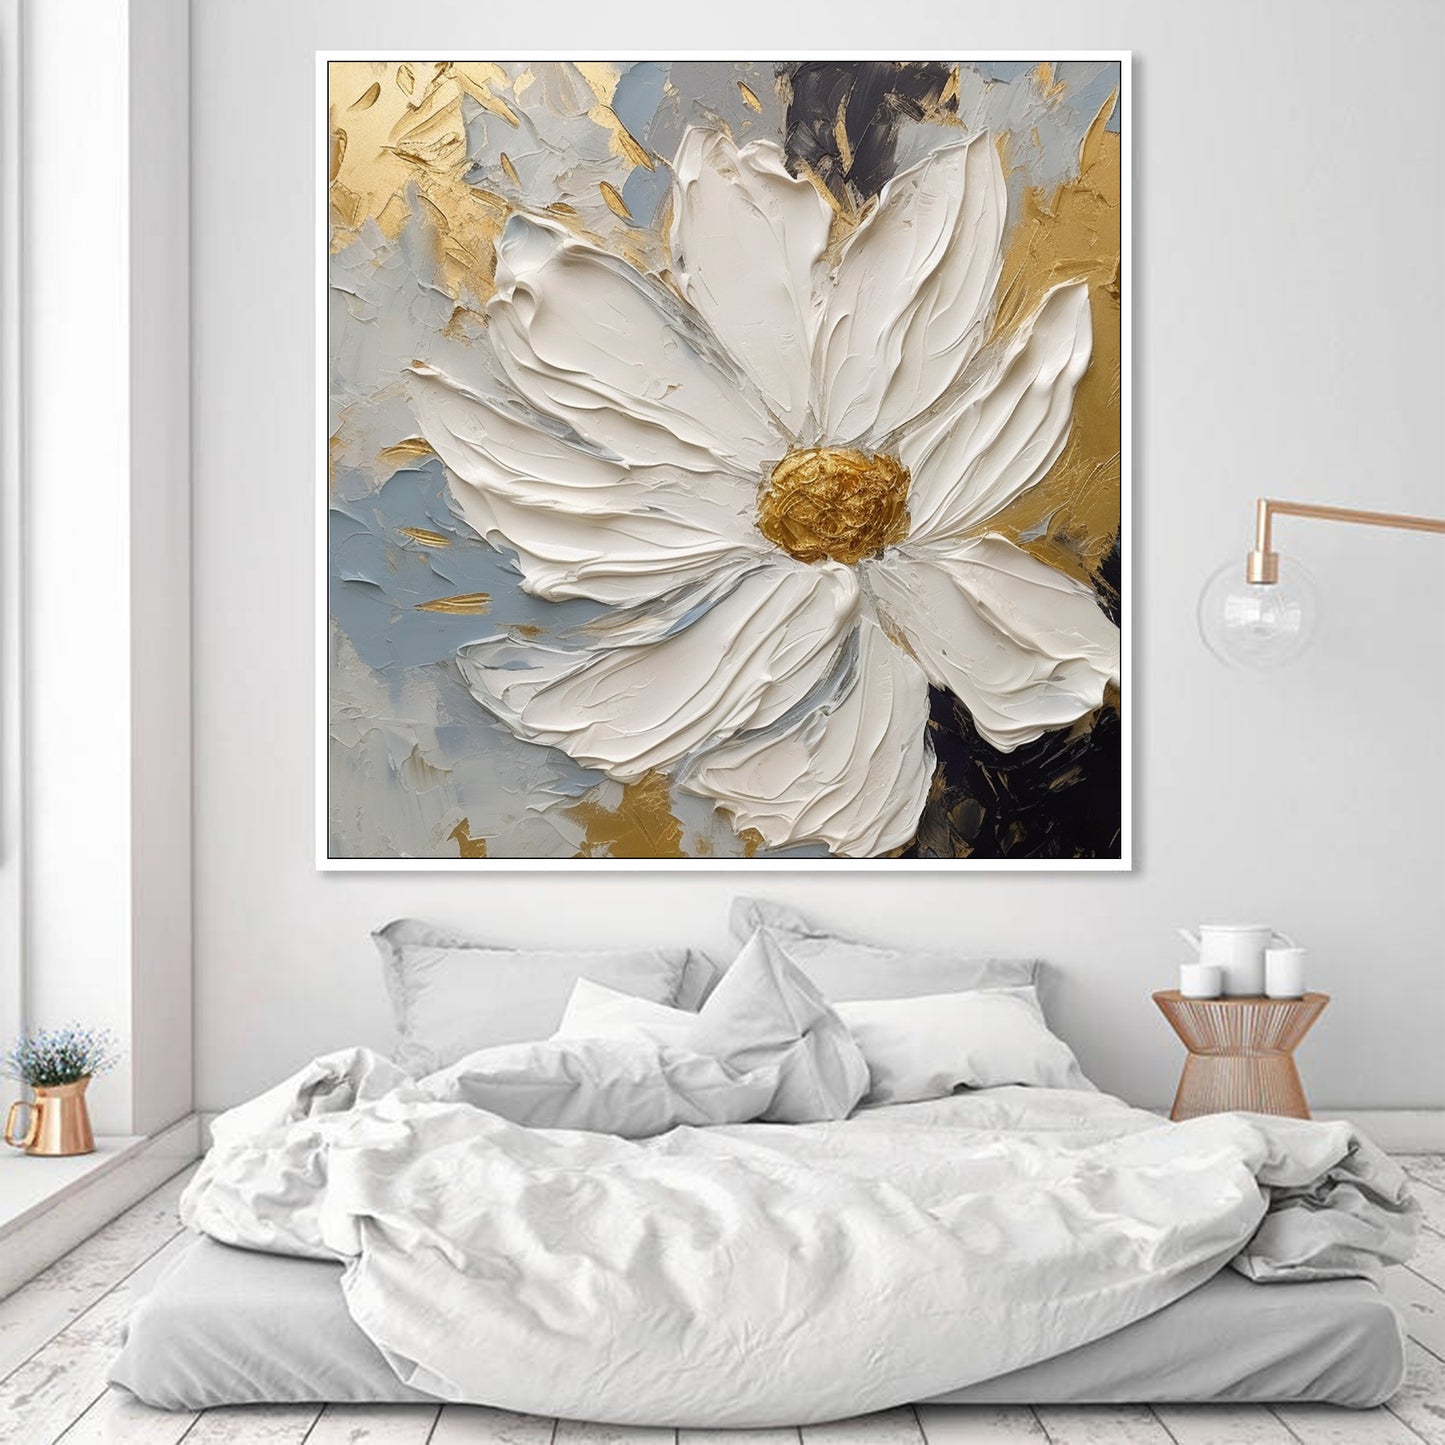 Large Flower Oil Painting on Canvas, Original Abstract Floral Painting F0416ART2310